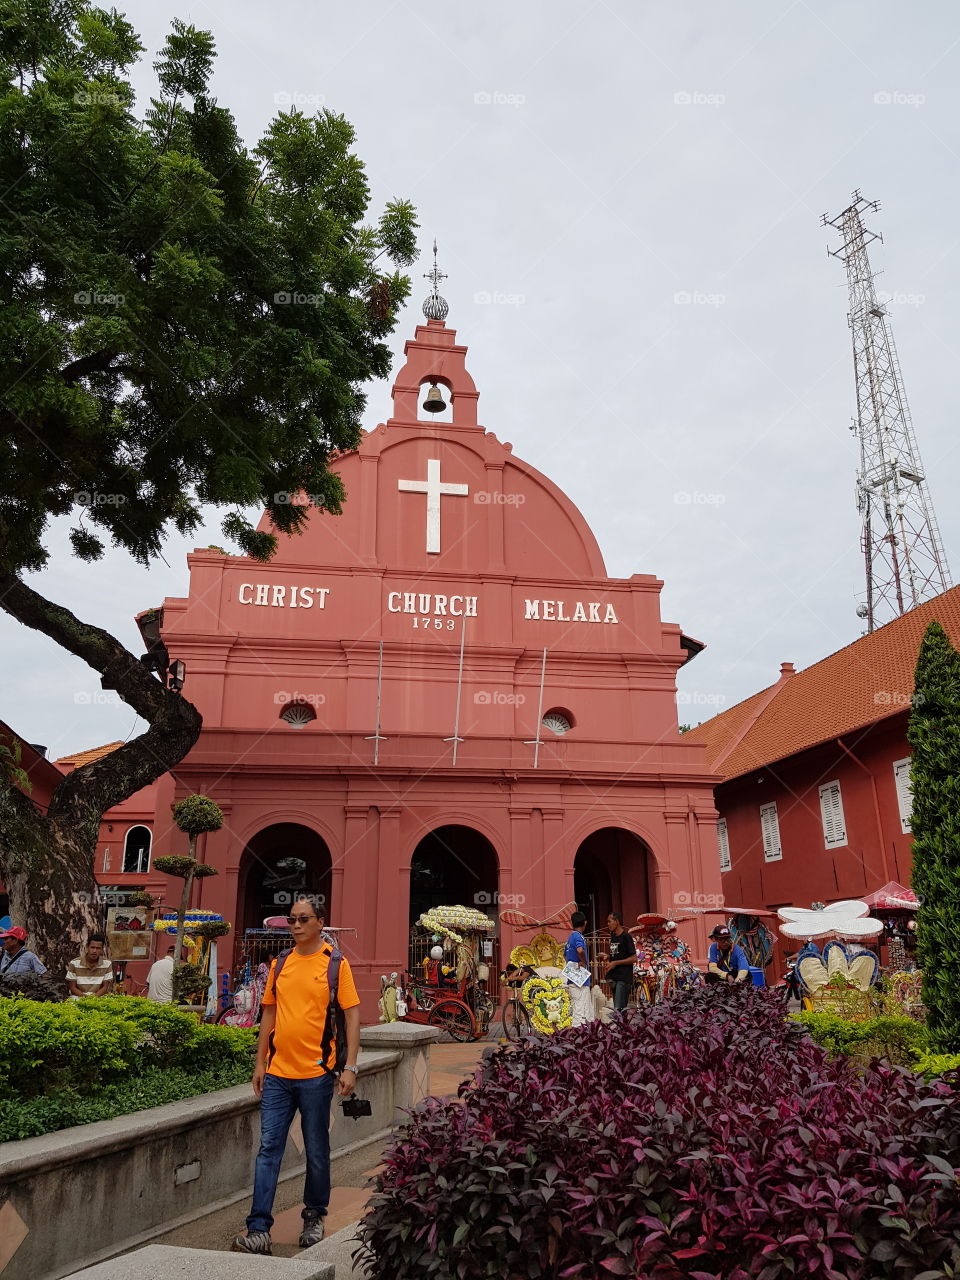 Christ Church Malacca is an 18th-century Anglican church in the city of Malacca City, Malaysia. It is the oldest functioning Protestant church in Malaysia.